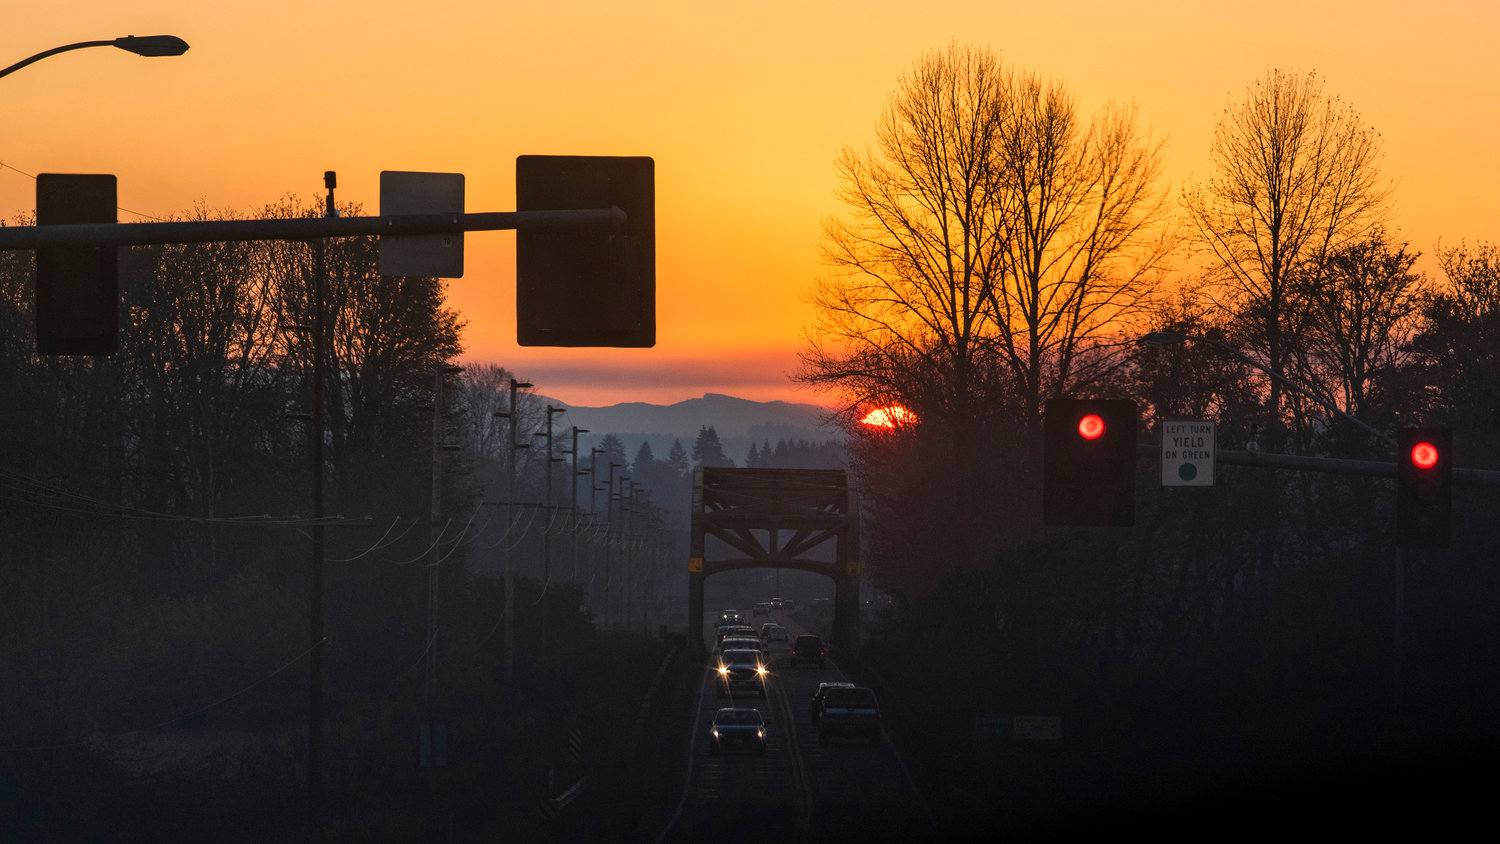 The sun sets over the Willapa Hills, illuminating the sky in an orange hue as seen from Chehalis Tuesday evening.